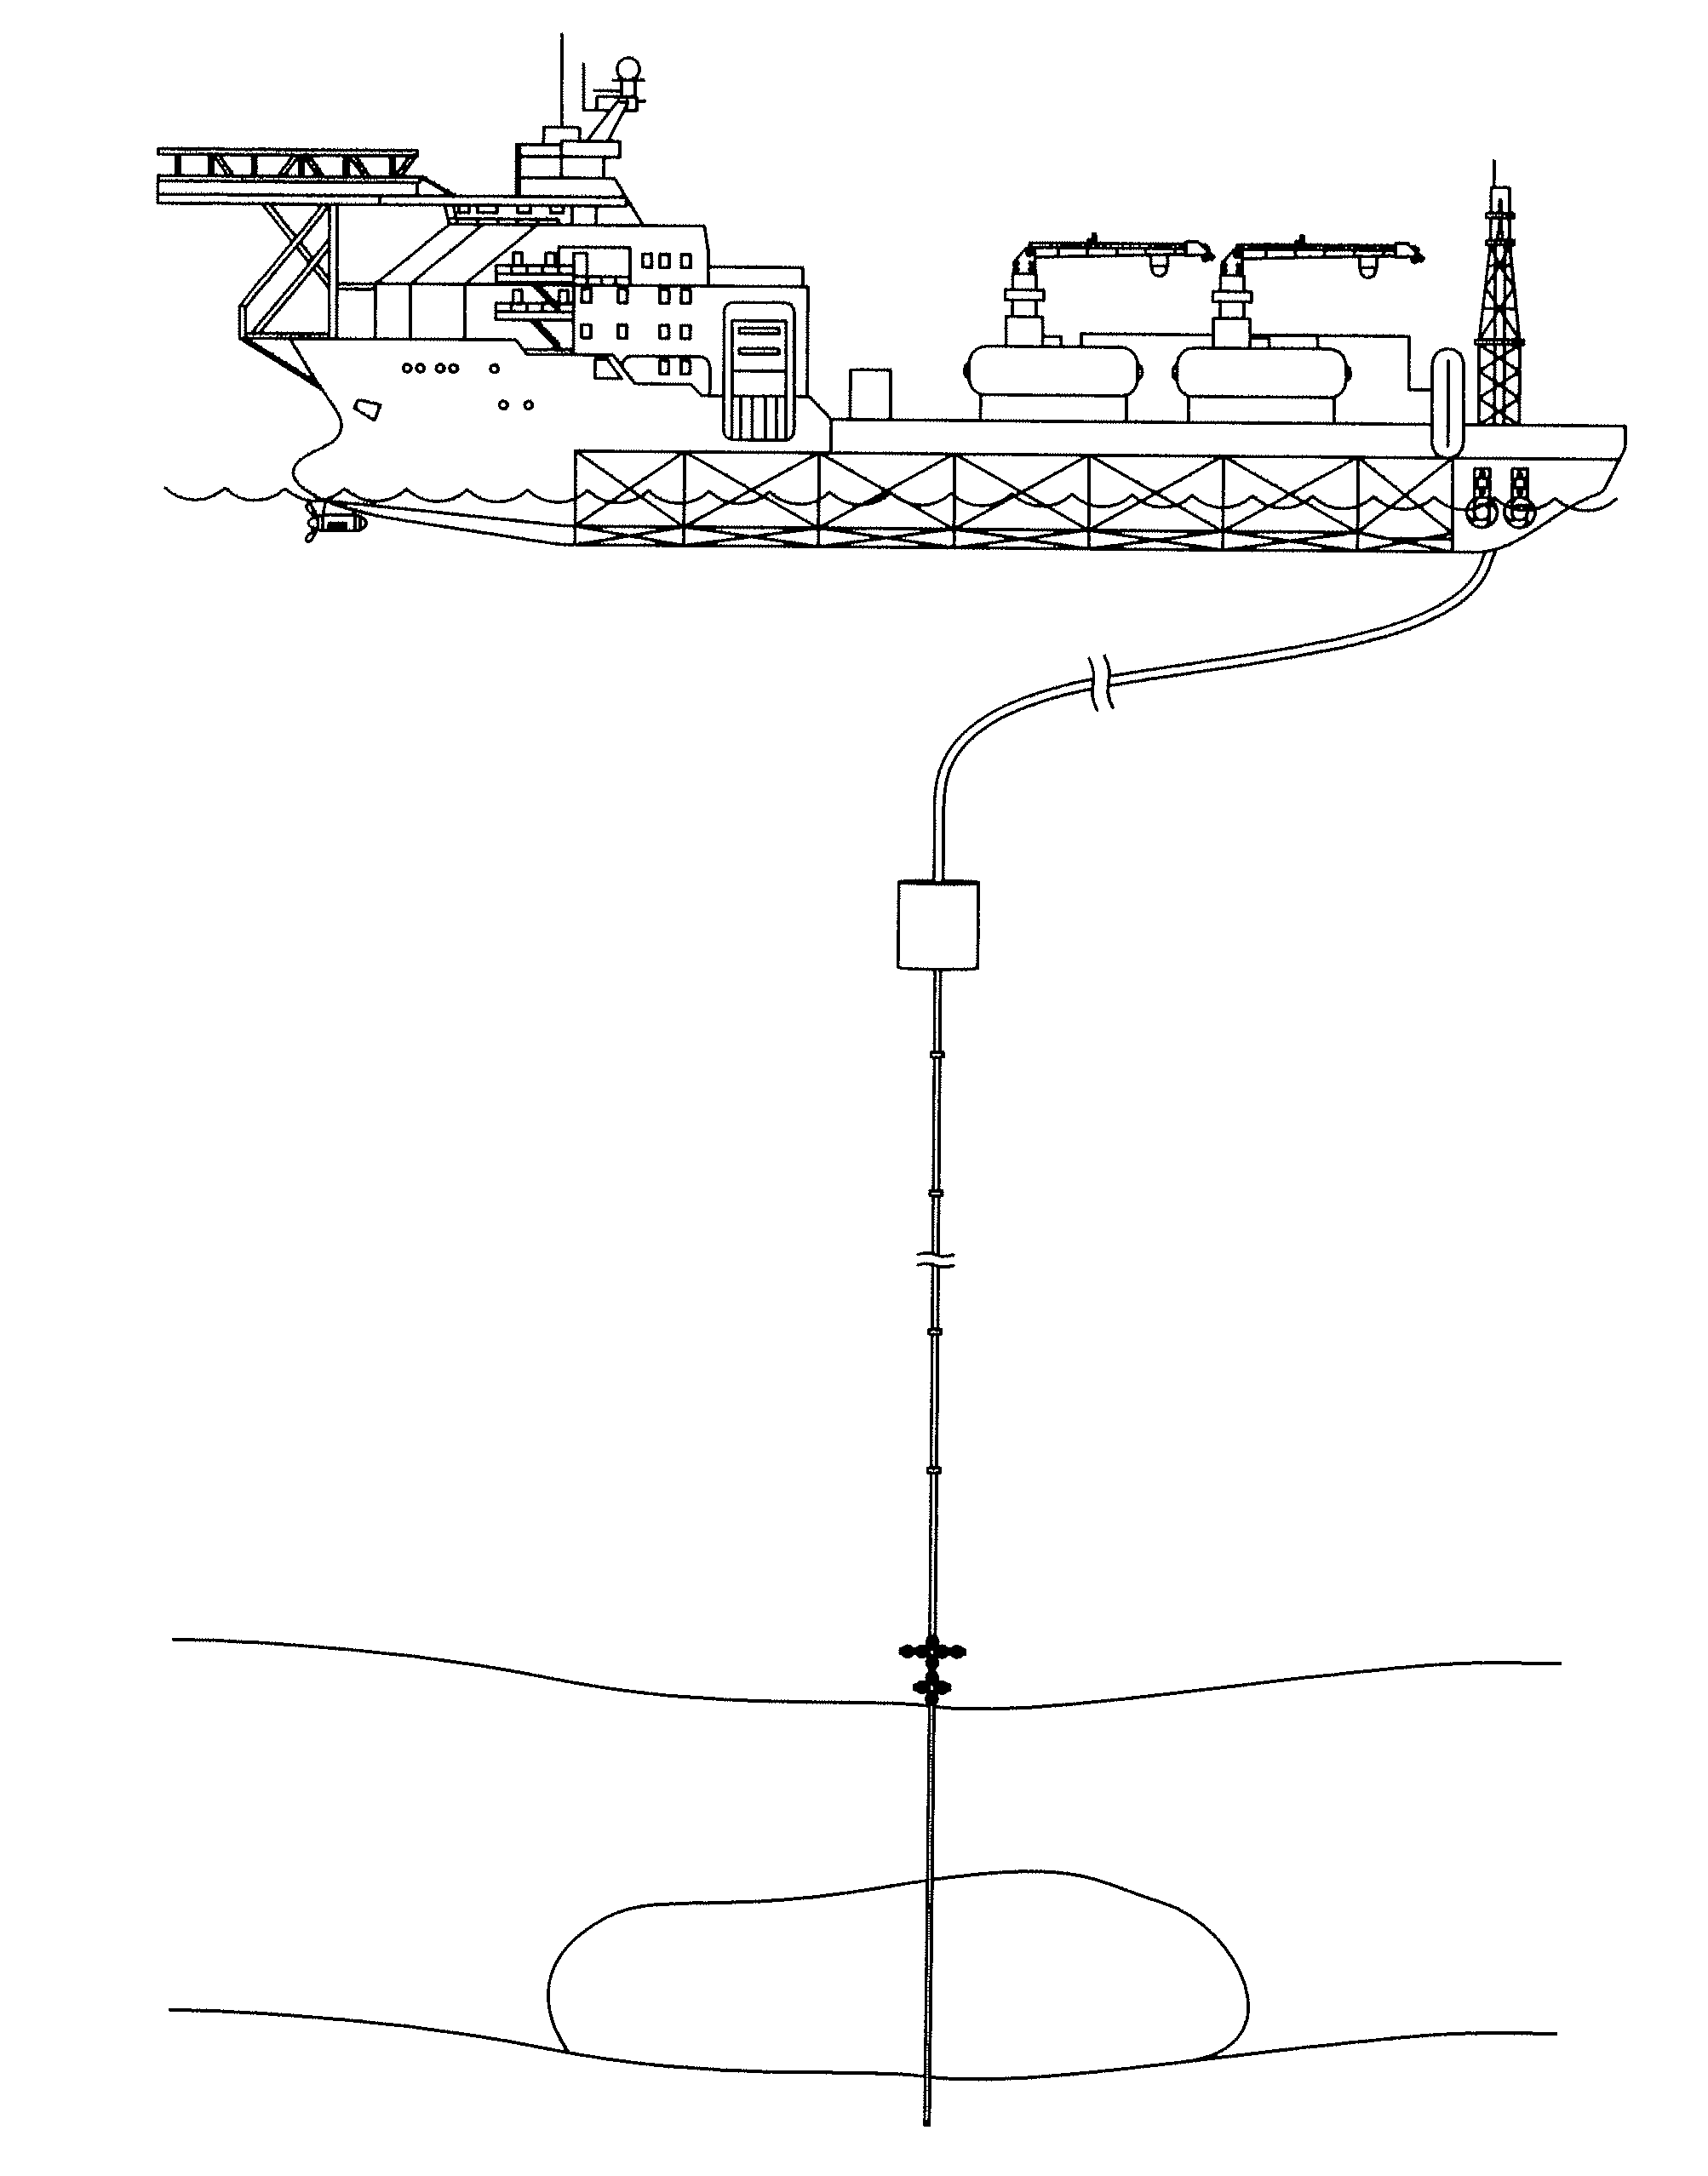 Modular Exploration and Production System Including an Extended Well Testing Service Vessel